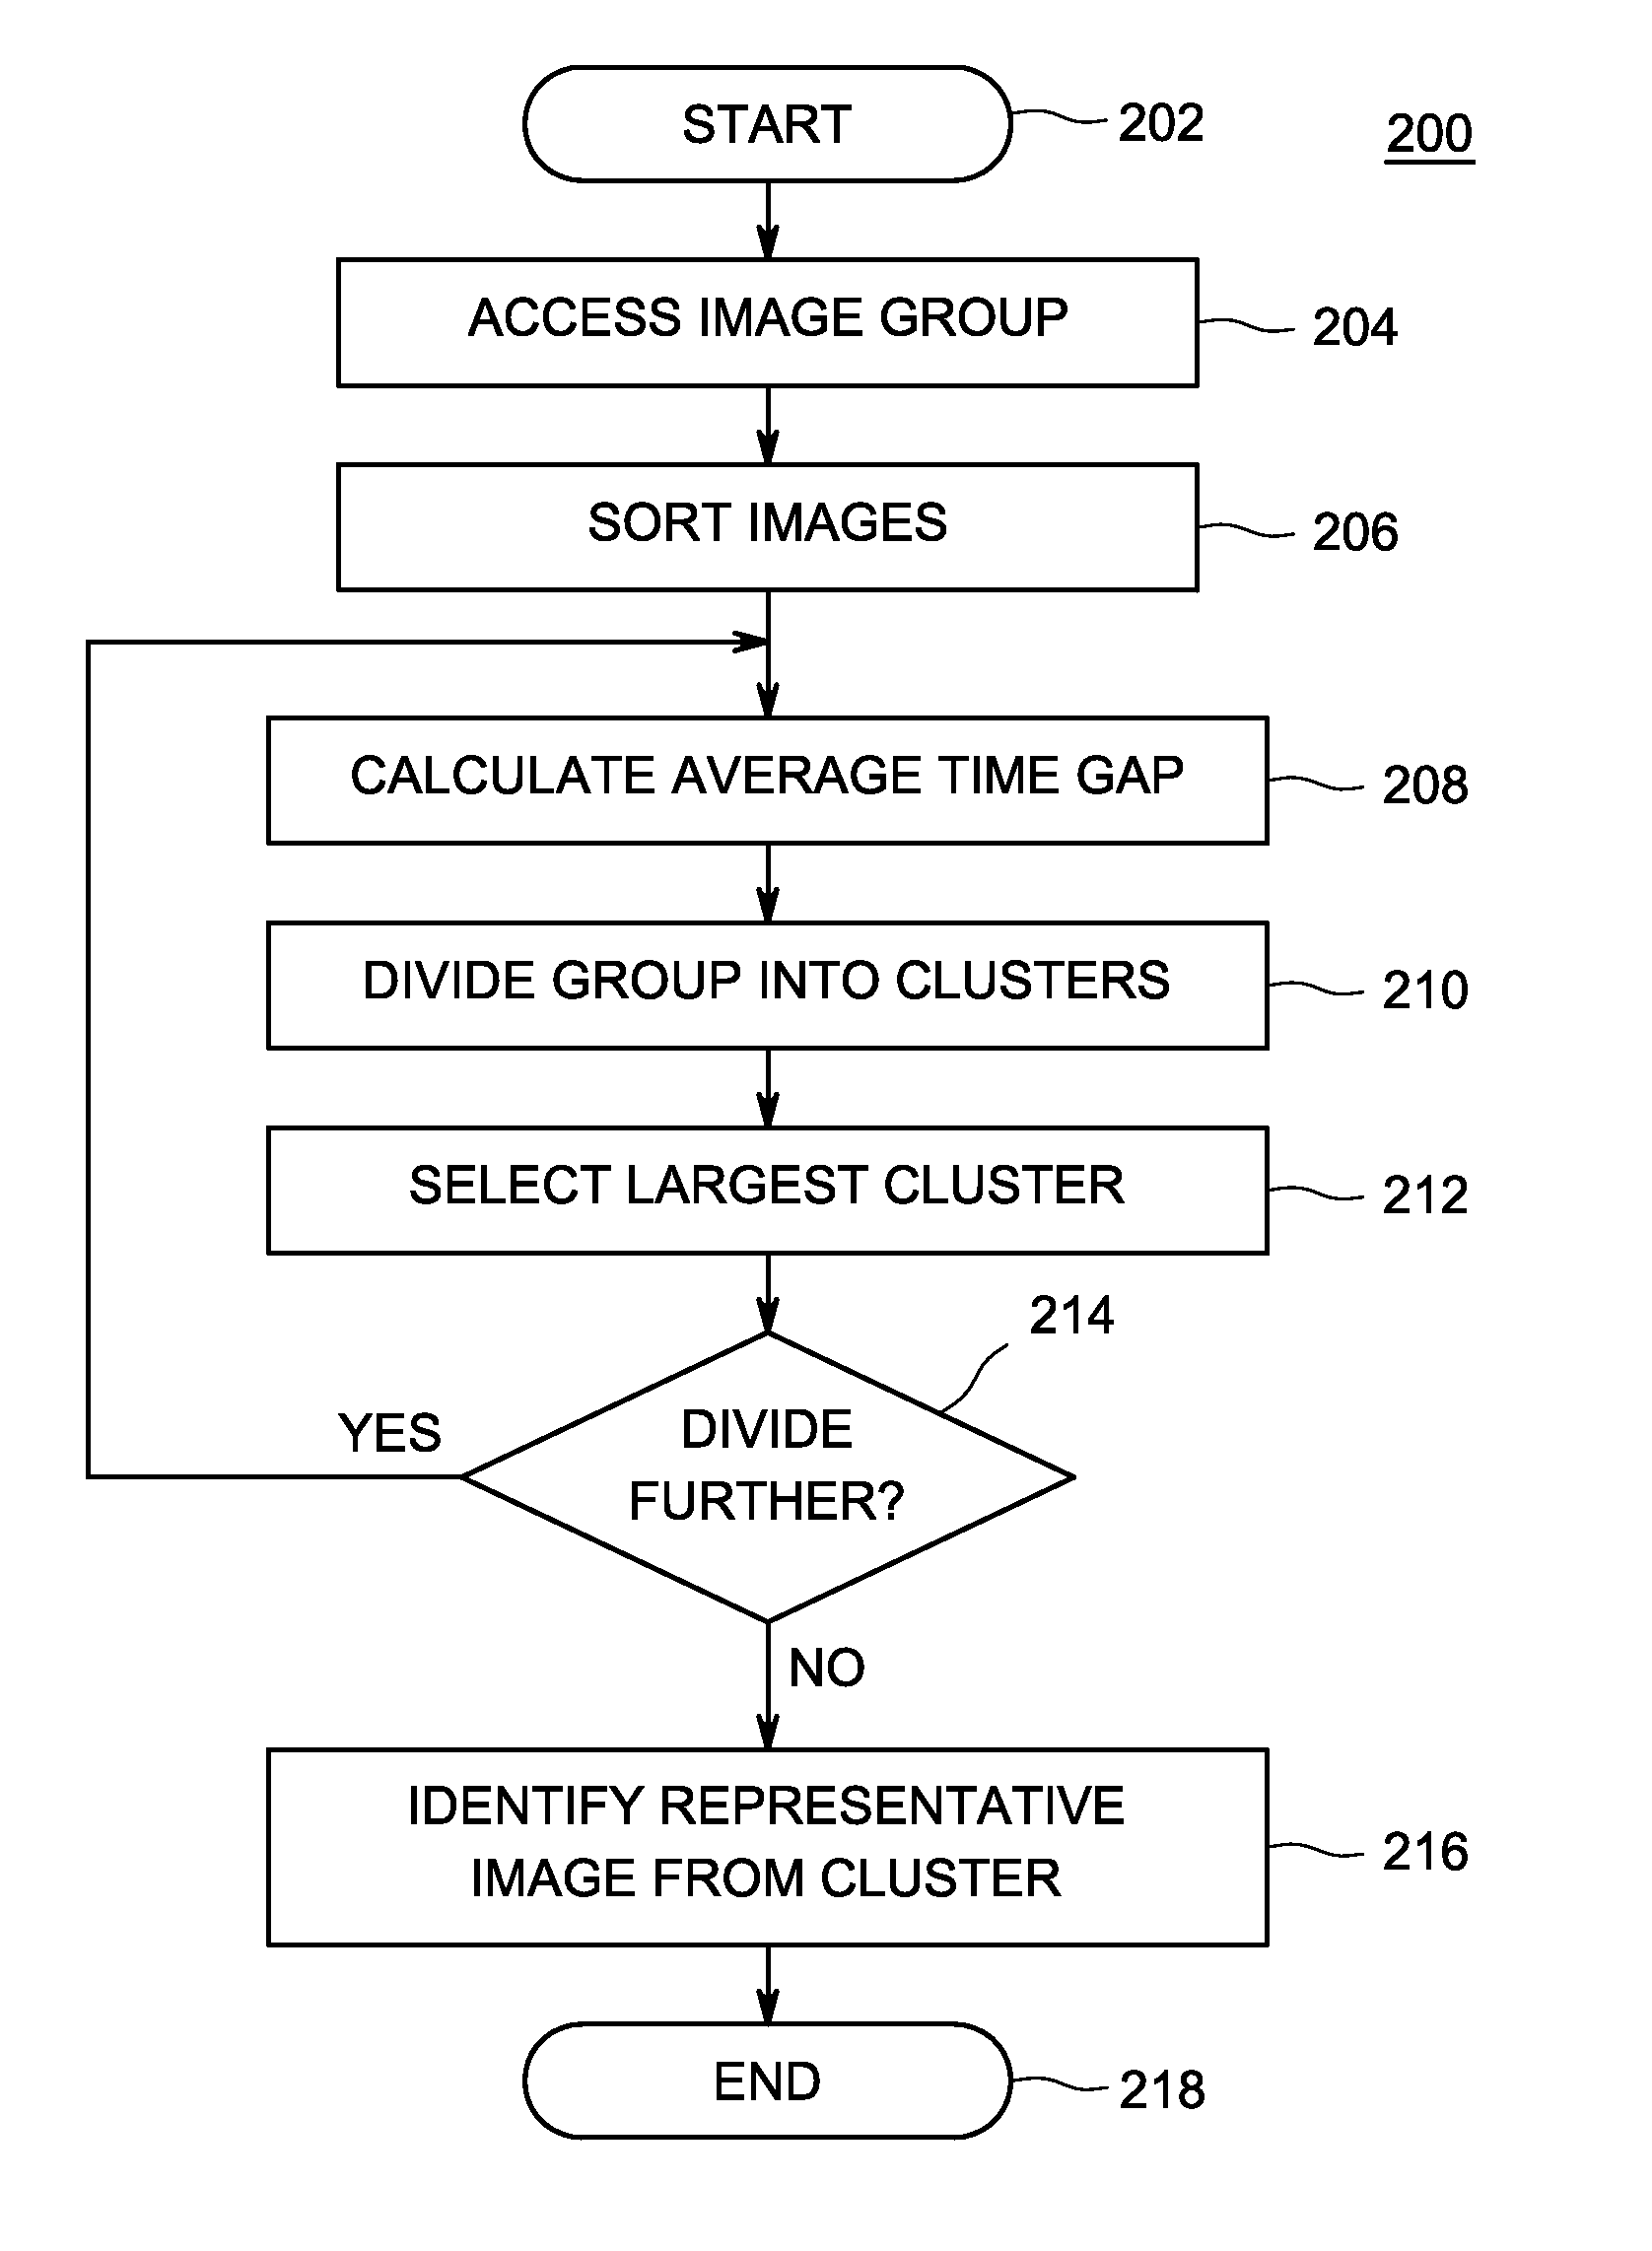 Method and apparatus for automatically identifying a representative image for an image group